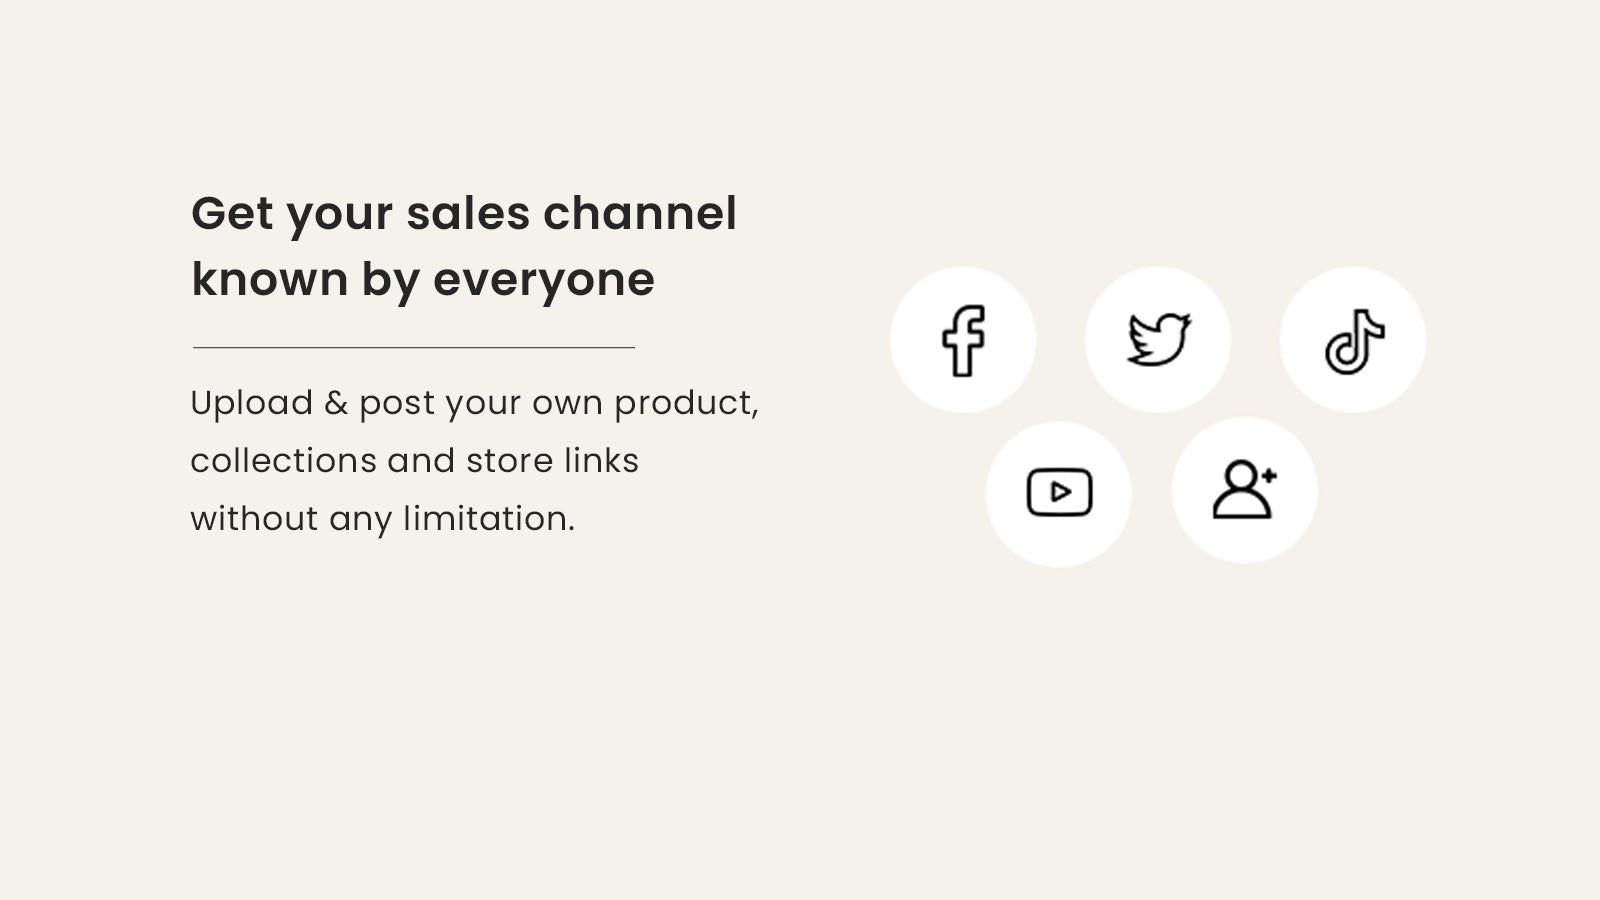 Get your sales channels known by everyone